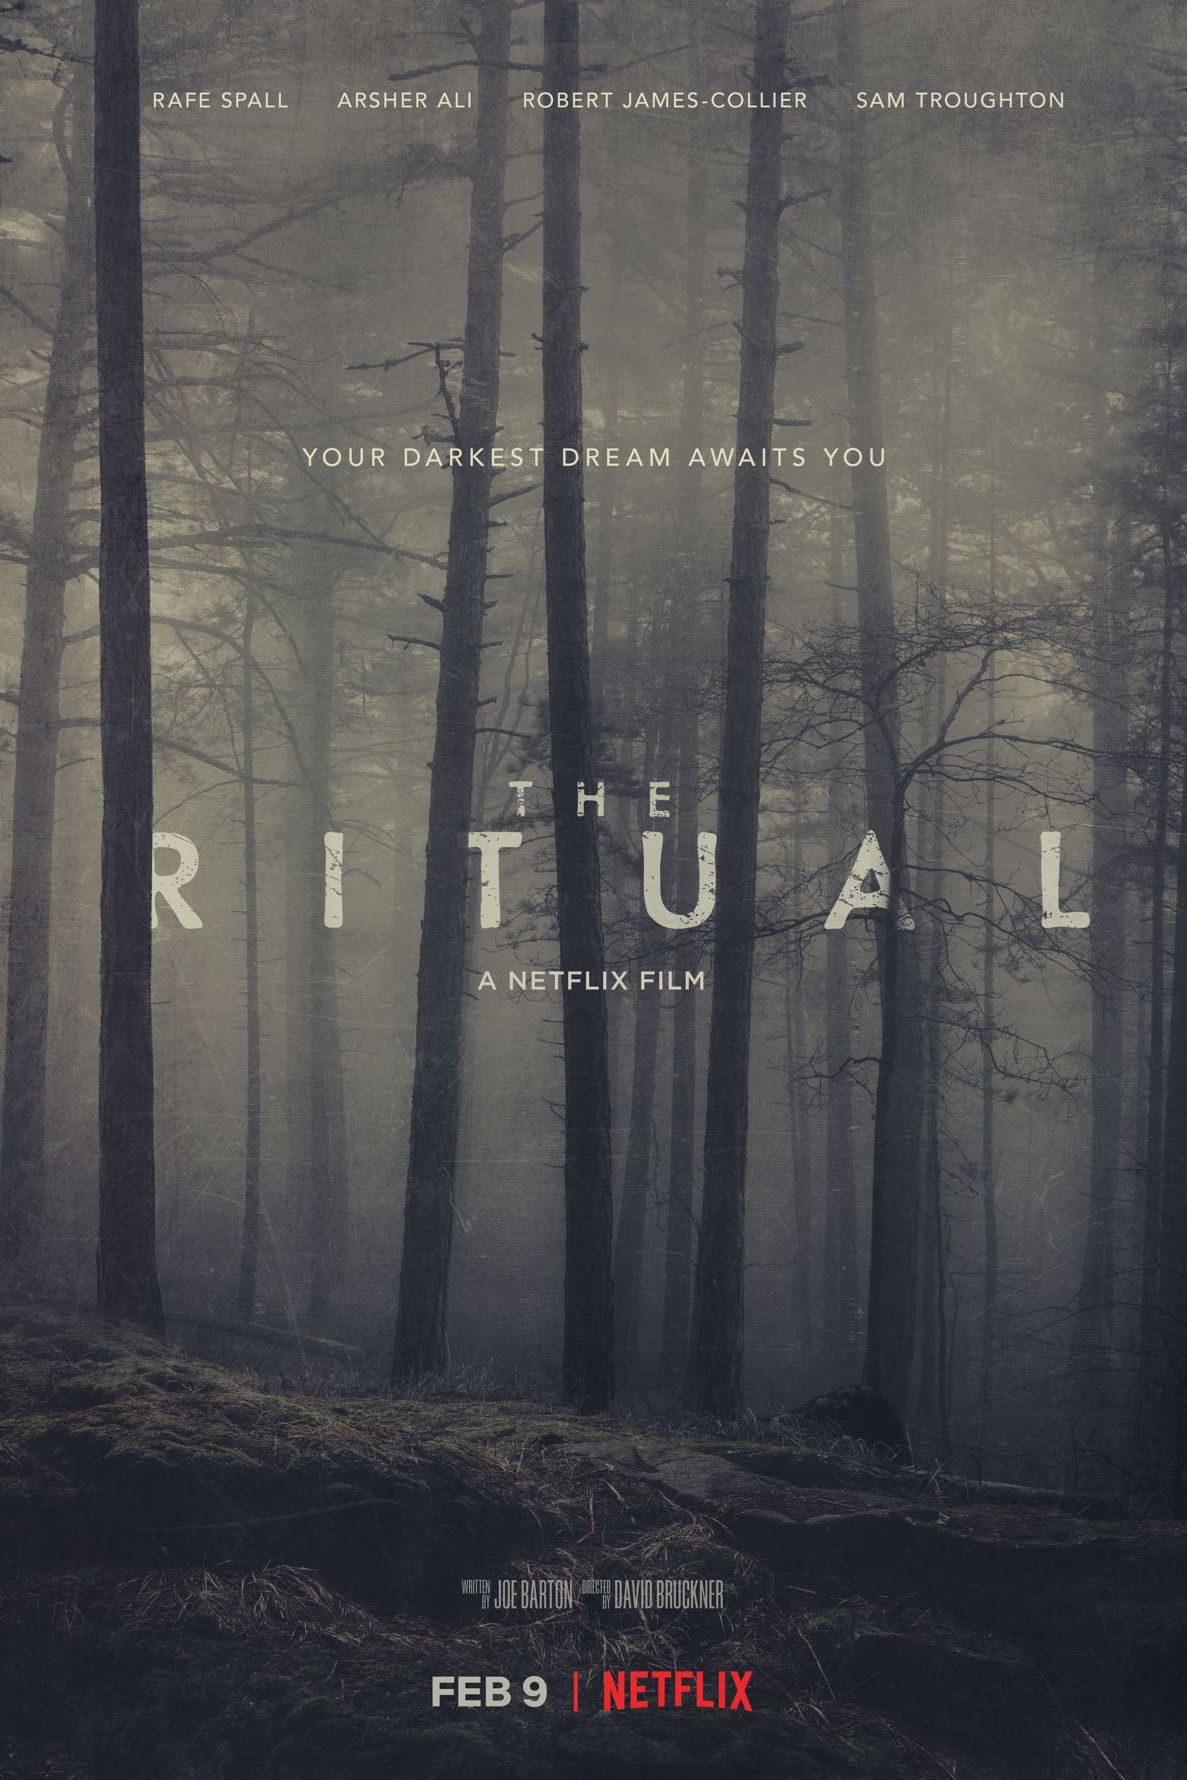 The Ritual Netflix Movie Poster